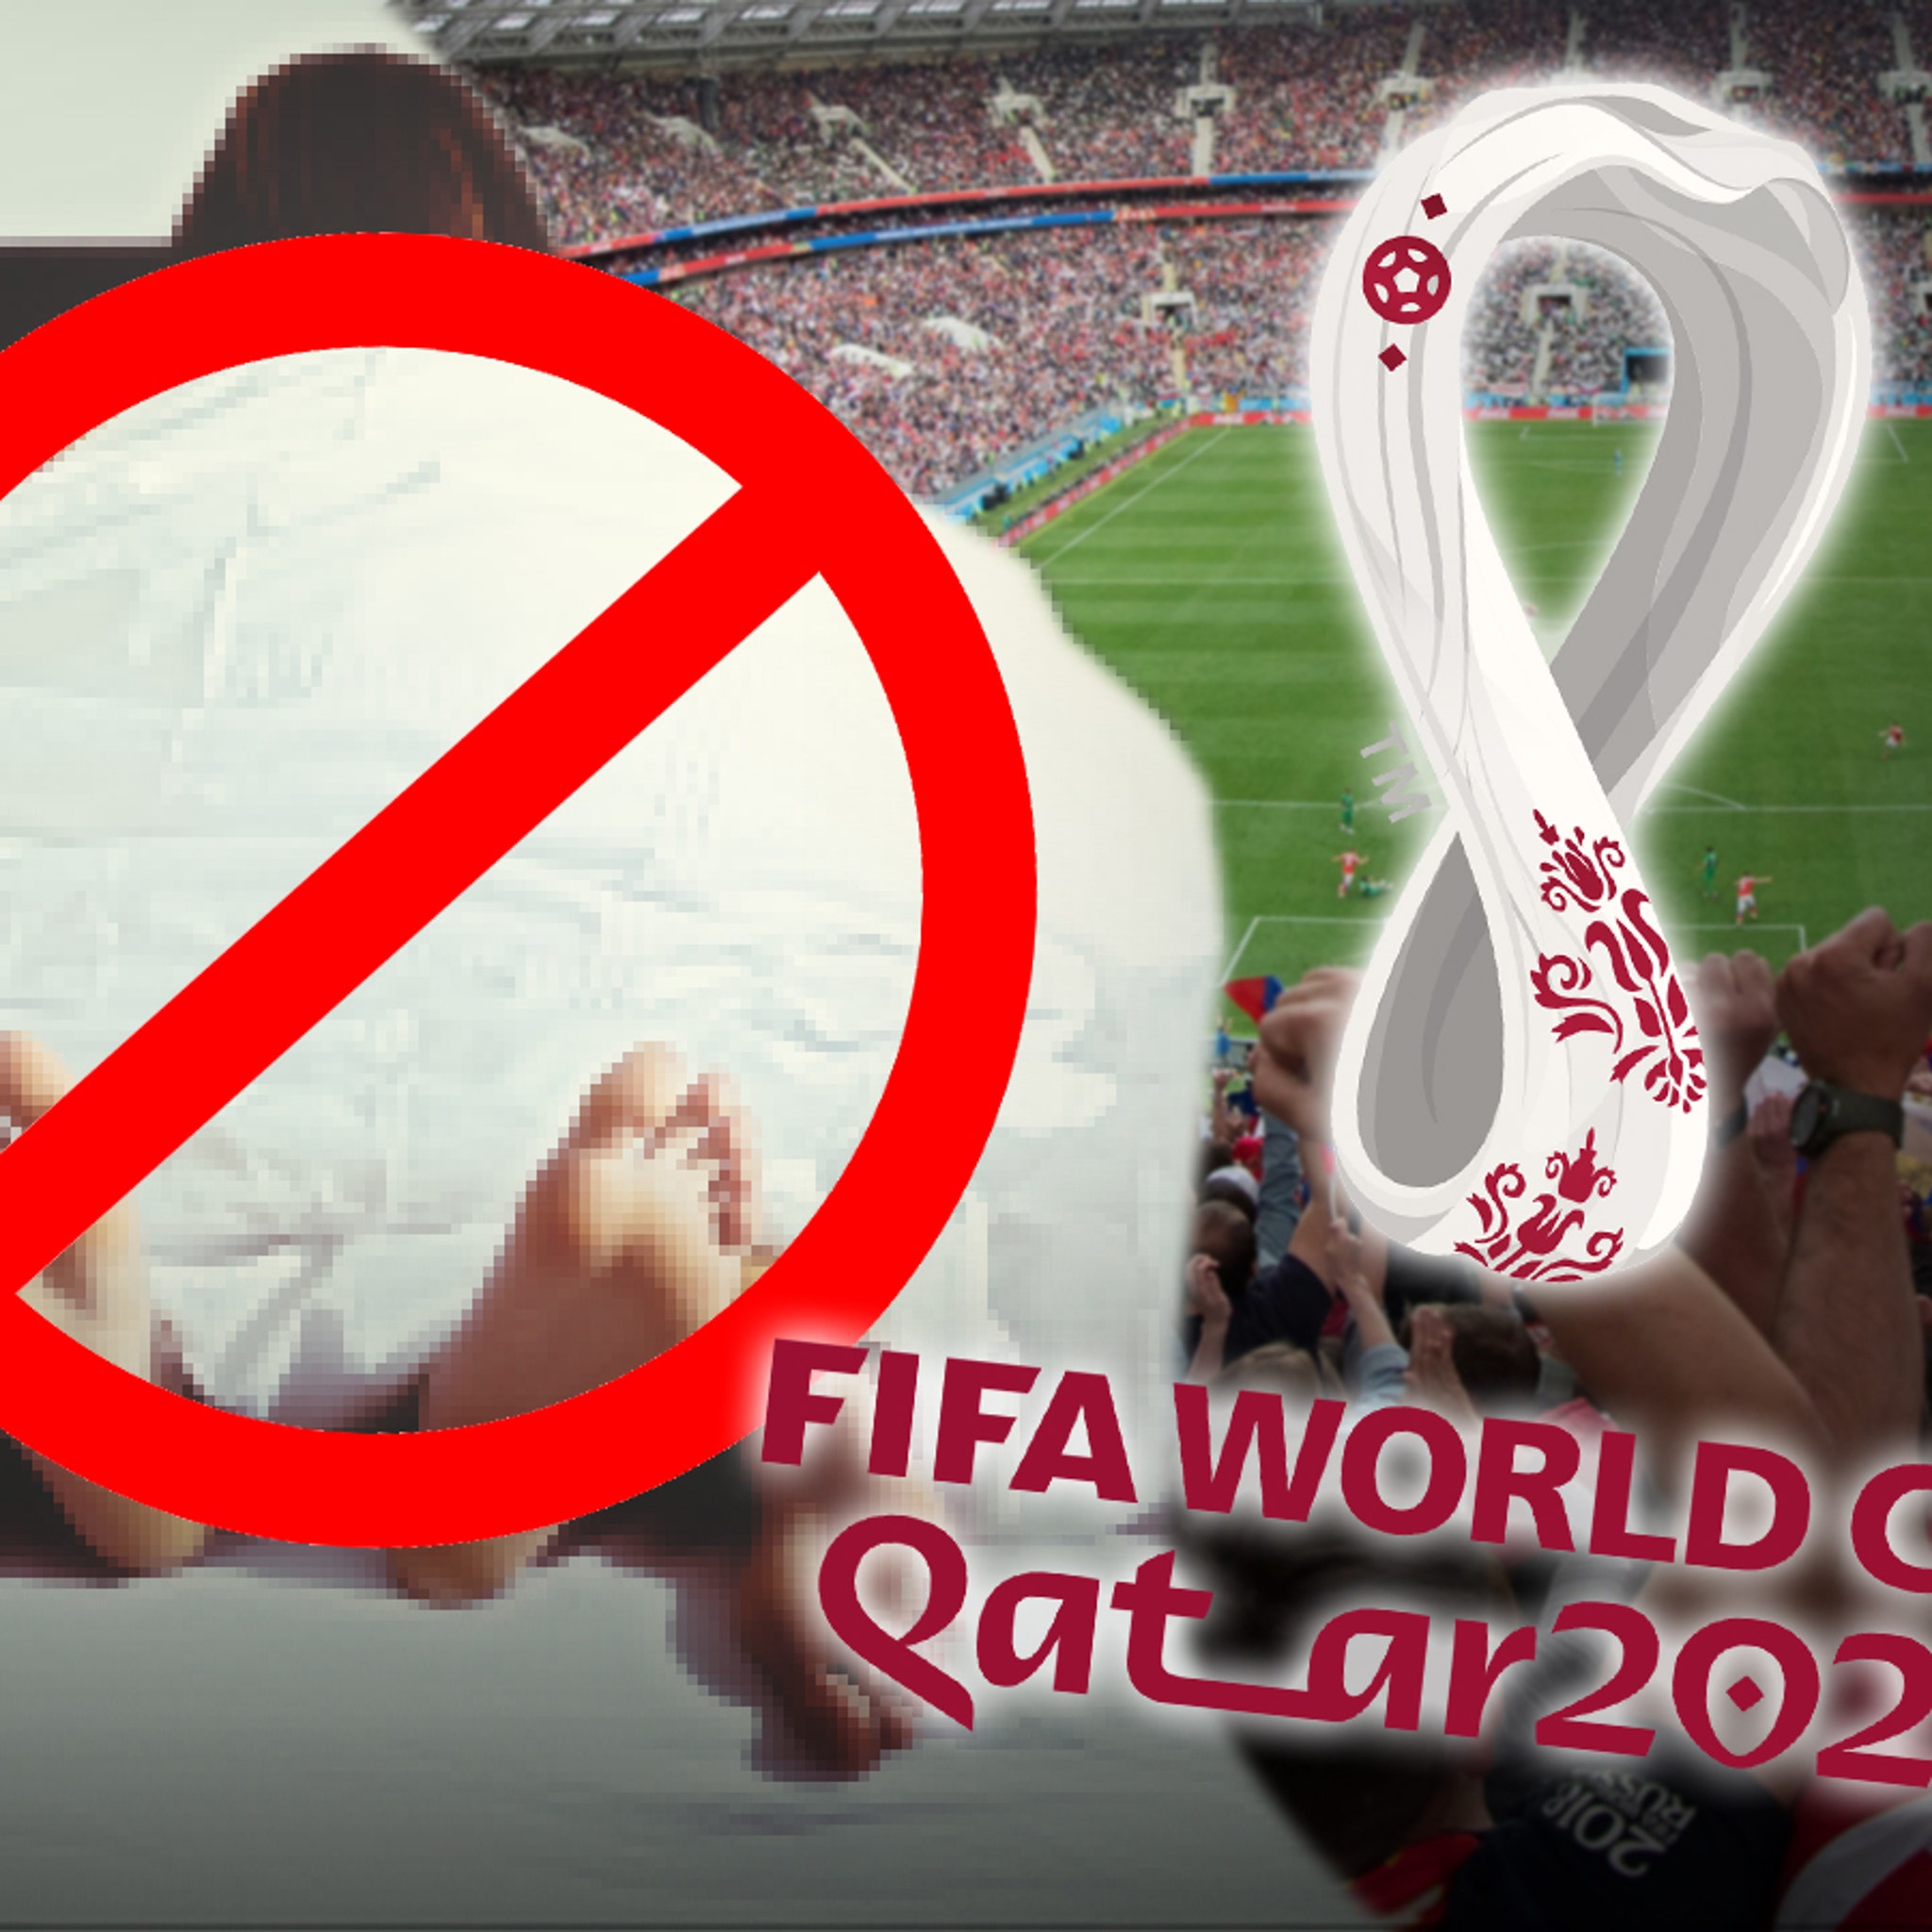 Qatar Reportedly Bans Single World Cup Fans From Sex, Could Face 7 Years Behind Bars image